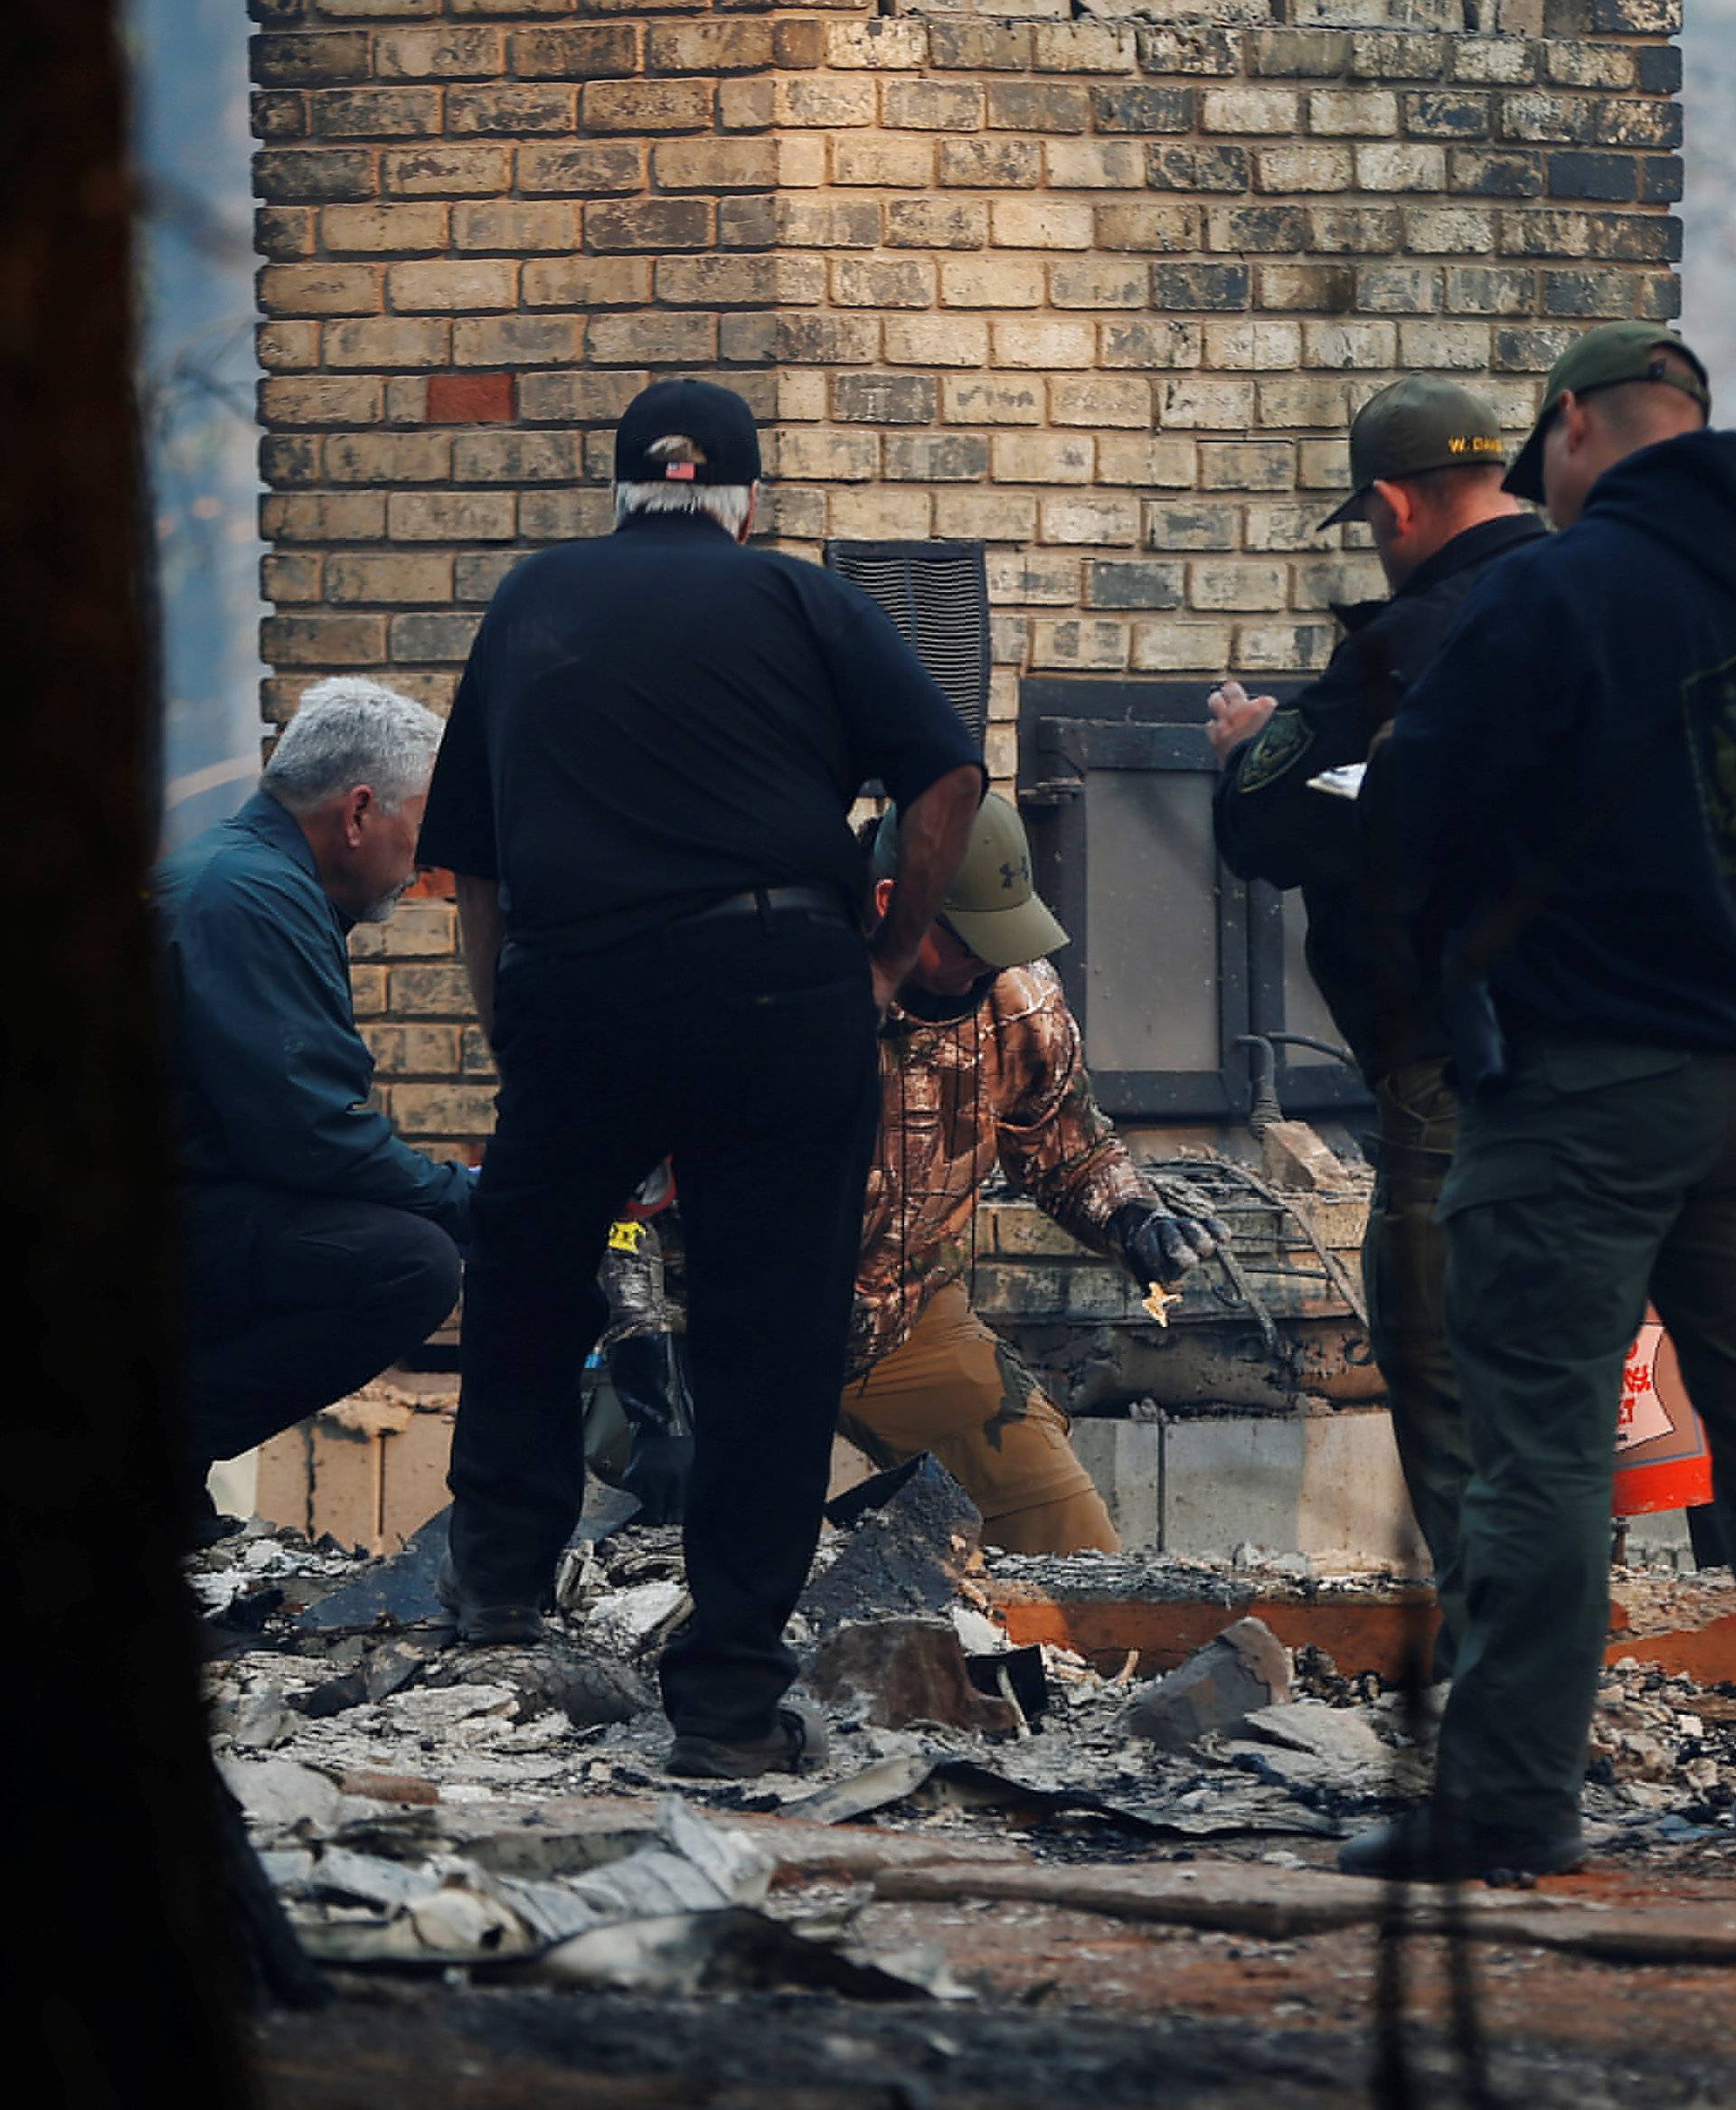 Sheriff deputies retrieve remains of a deceased victim from a home during the Camp Fire in Paradise